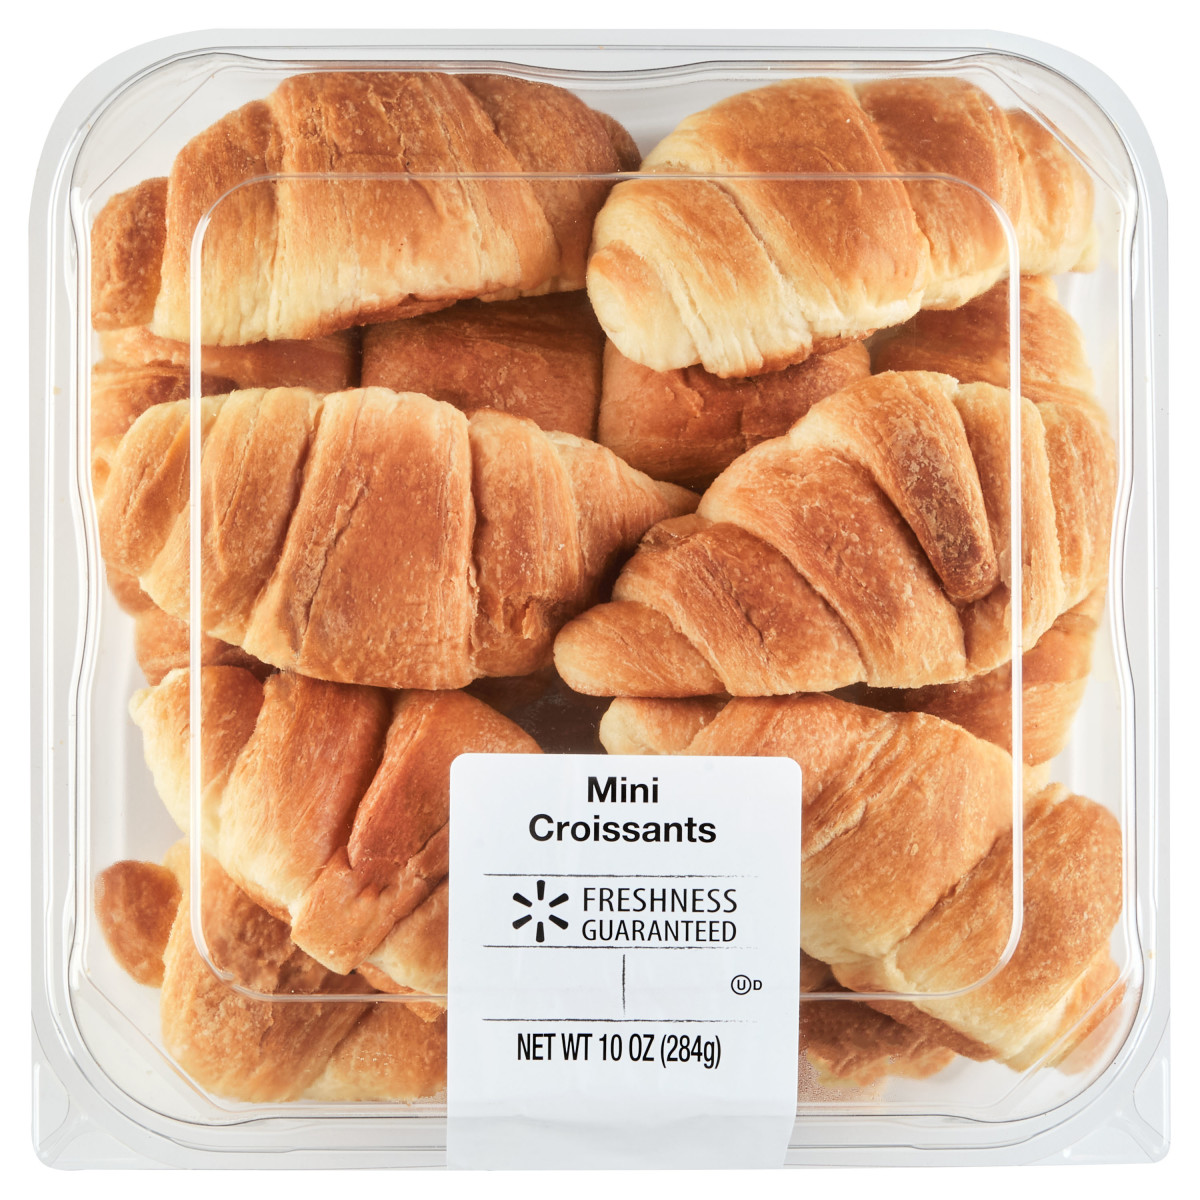 These are Walmart croissants. Not so pretty looking. They are never crispy or fresh.